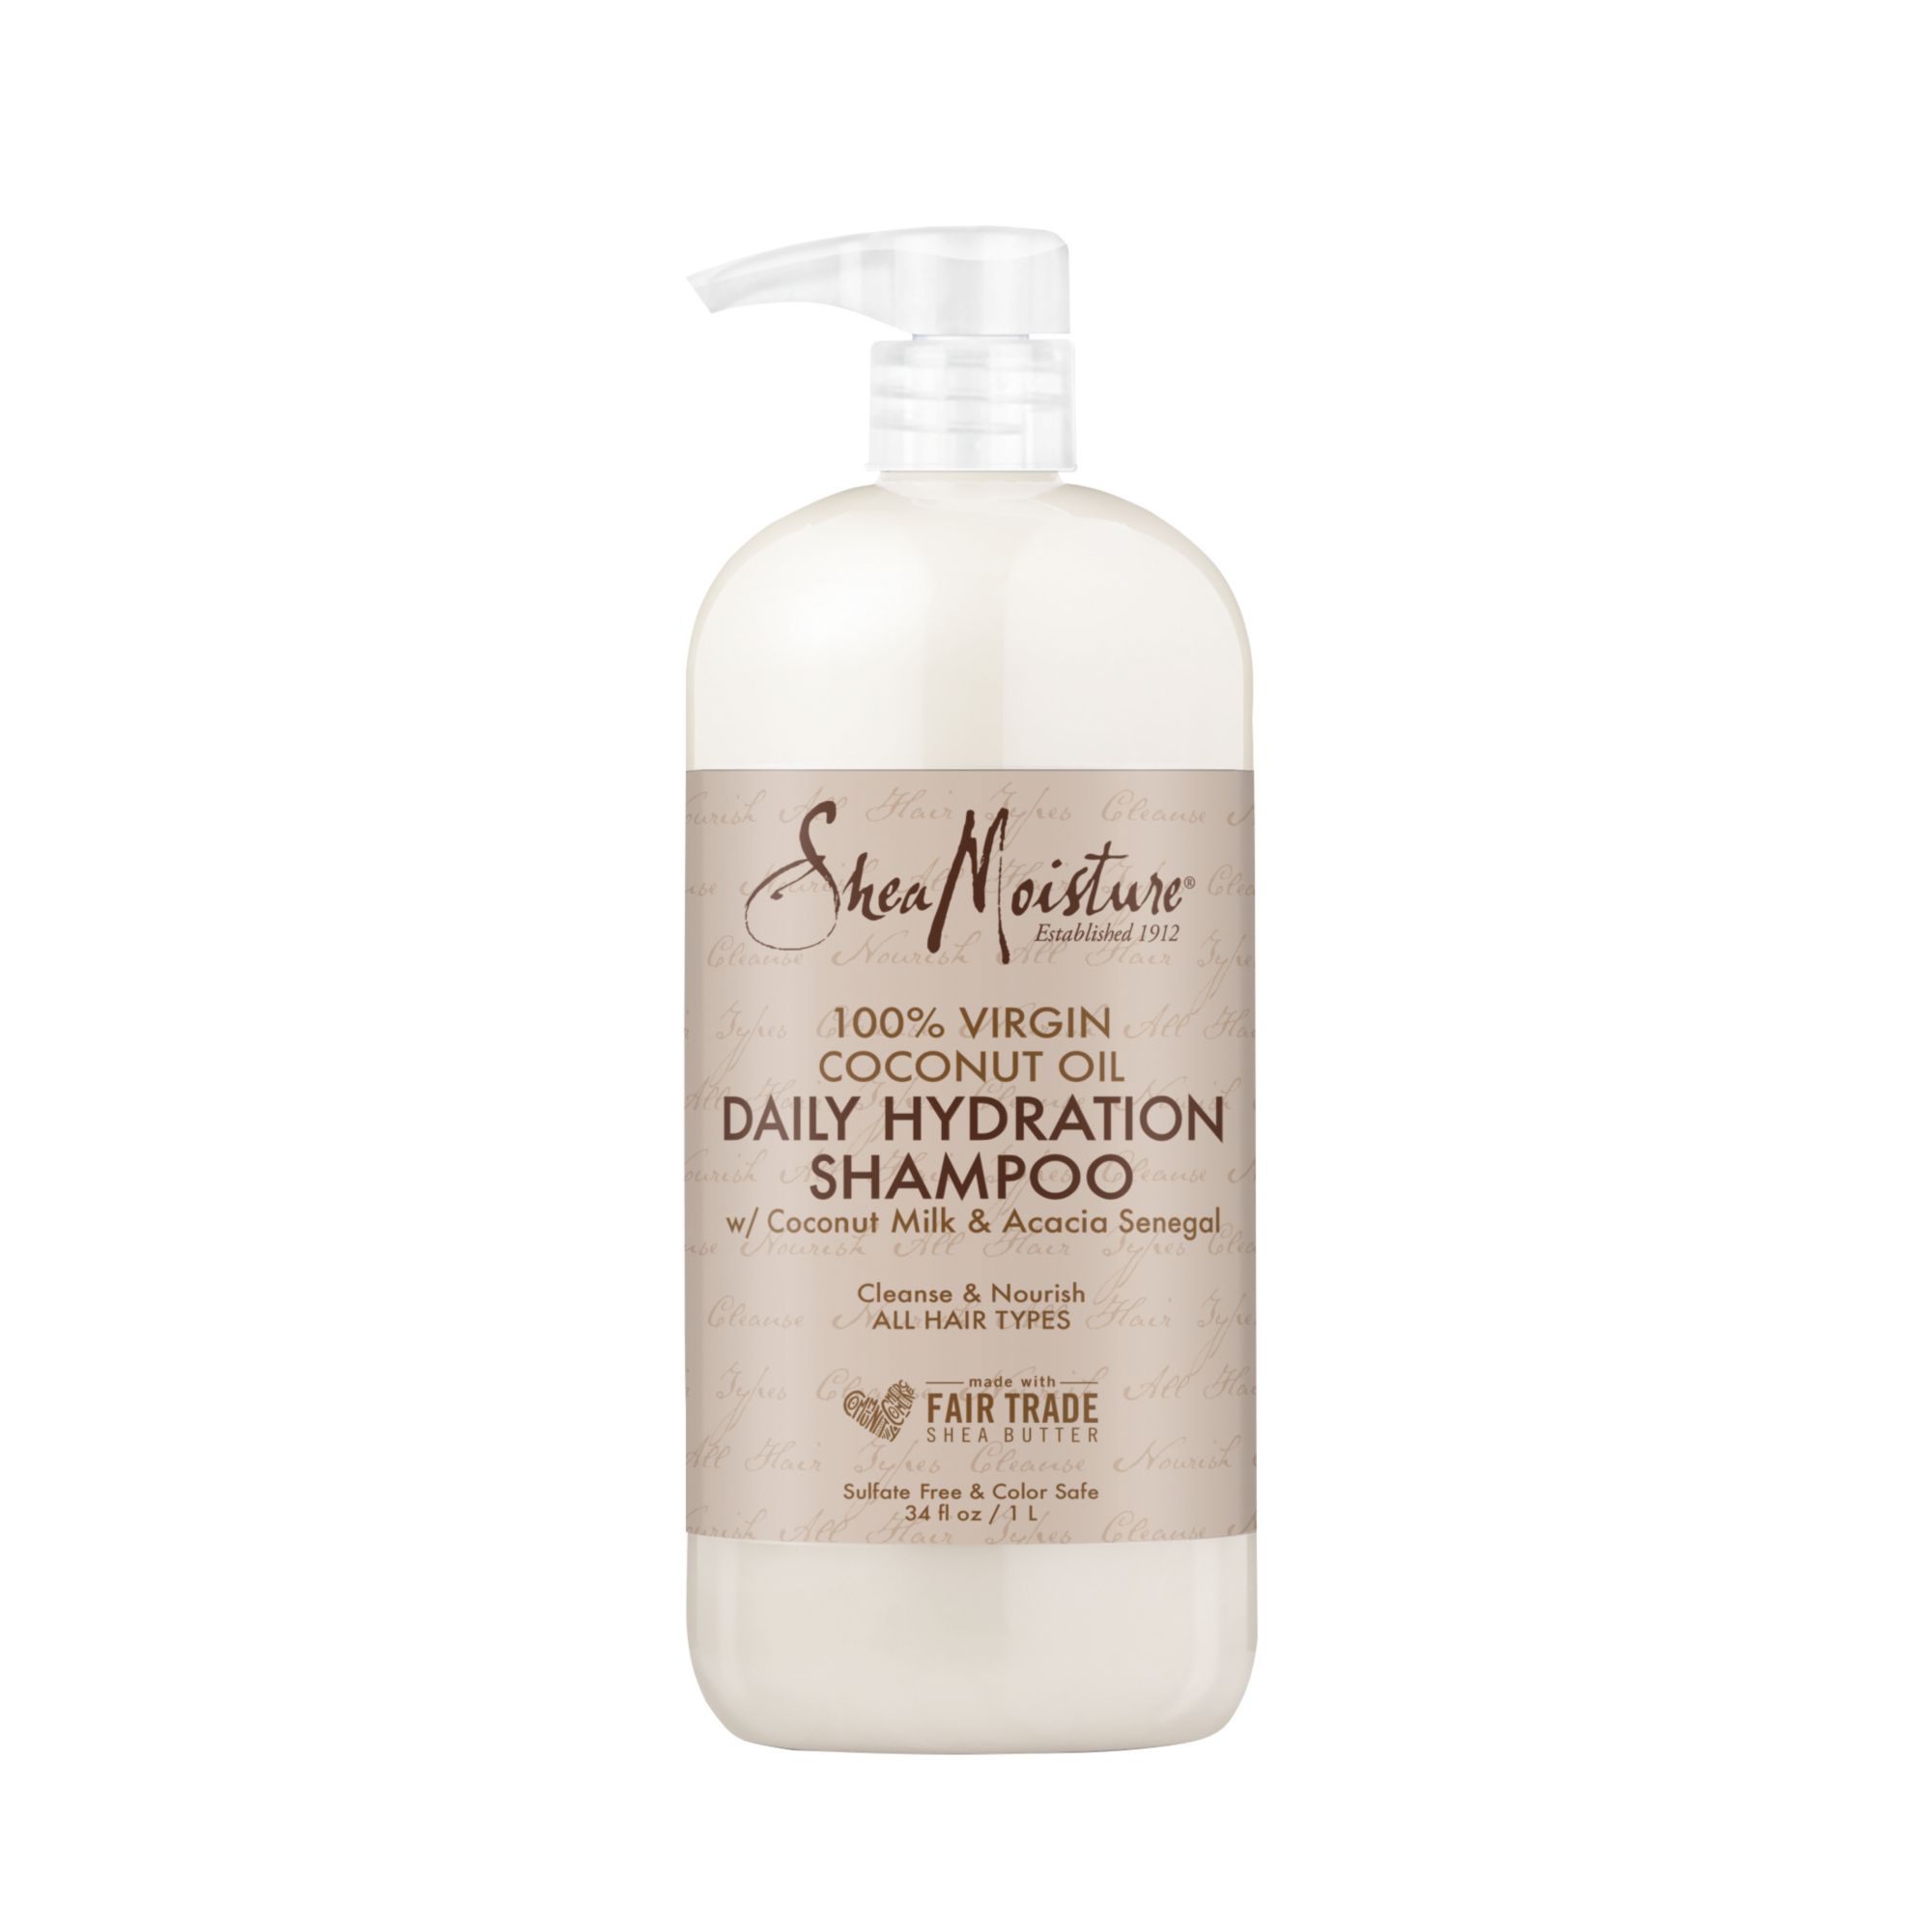 SheaMoisture Daily Hydration Shampoo for All Hair Types, Sulfate-Free, 34 oz.